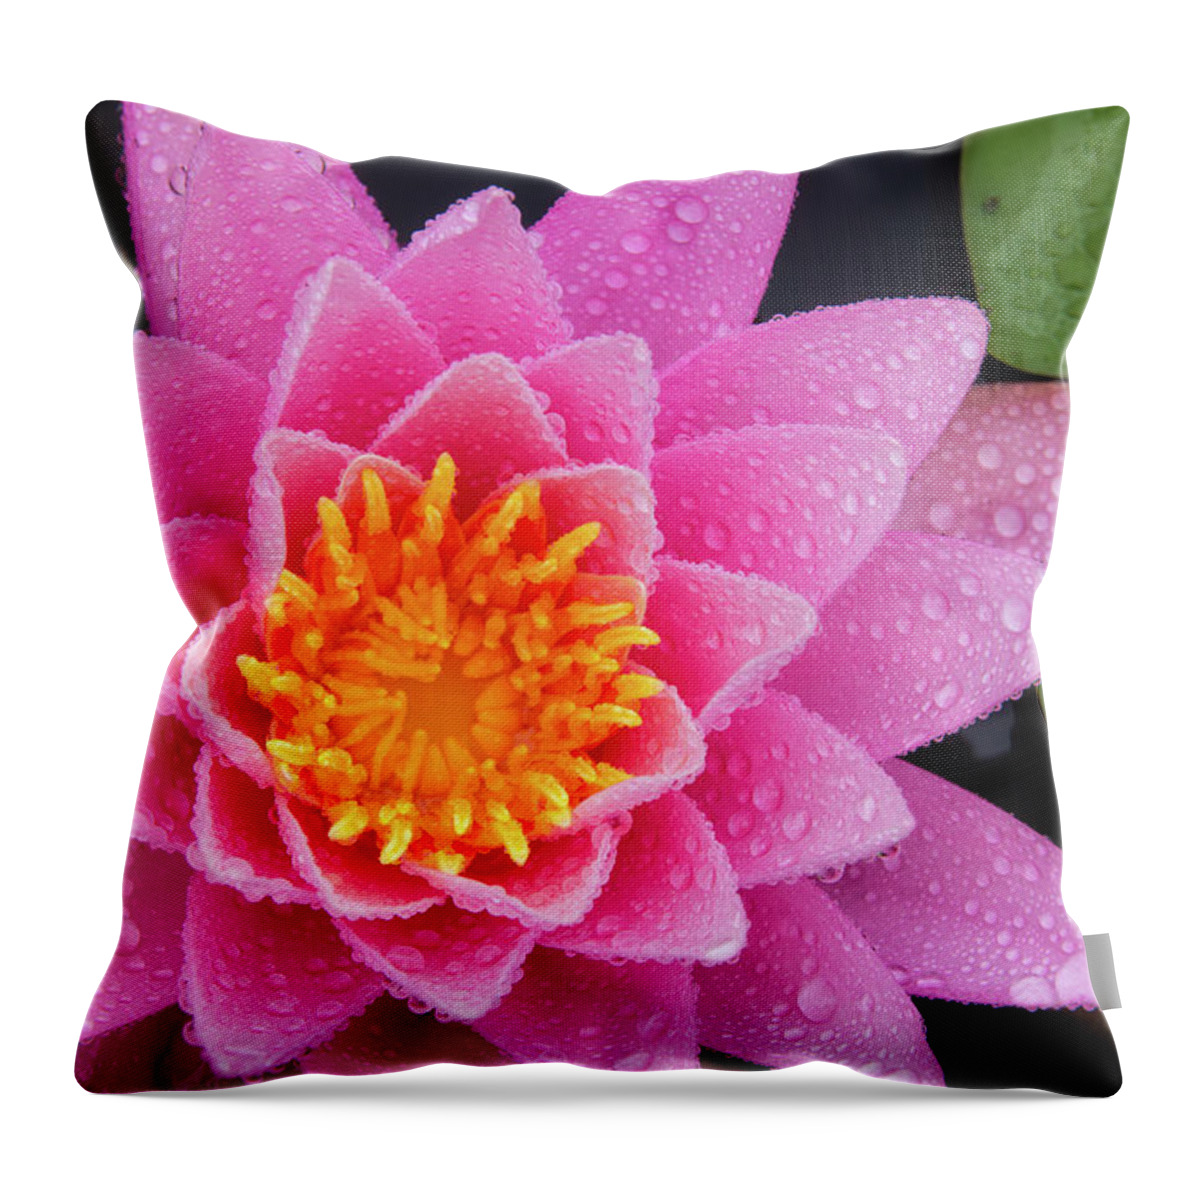 Bellamy Reservoir Throw Pillow featuring the photograph Pink Petals In The Rain by Jeff Sinon